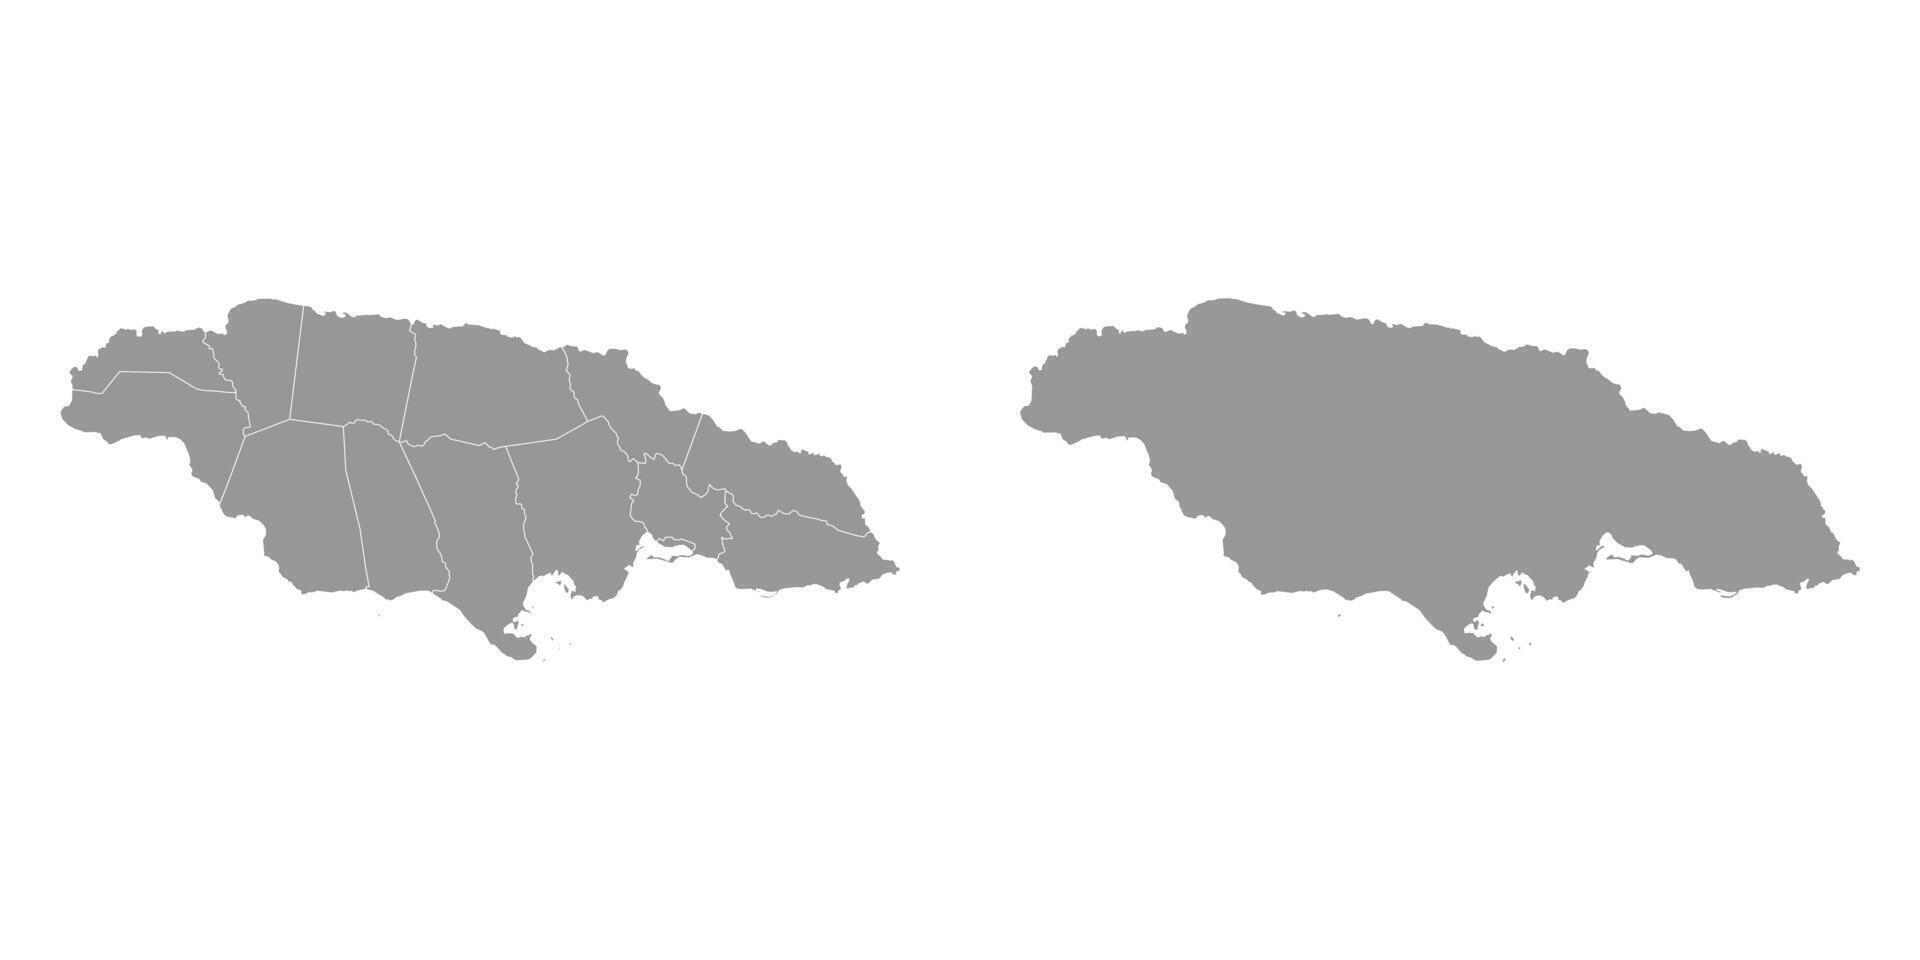 Jamaica map with administrative divisions. illustration. vector